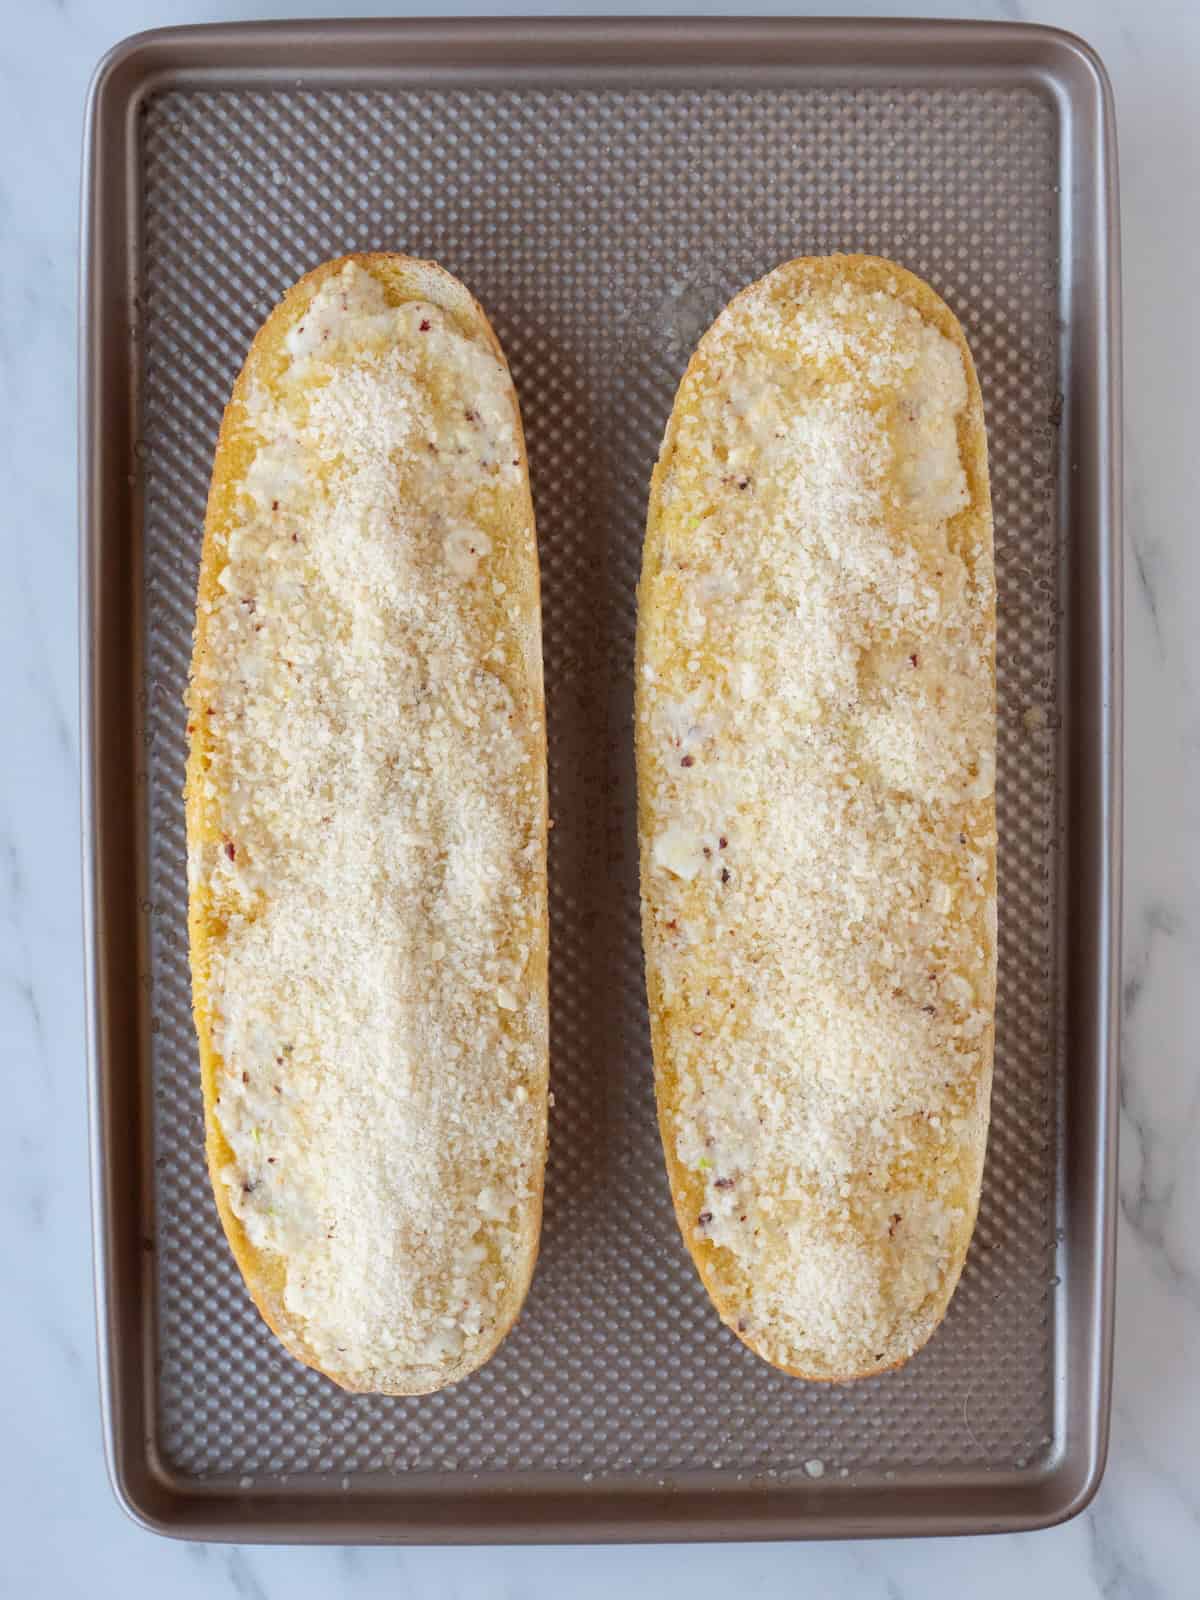 Horizontally cut halves of a bread loaf on a baking sheet, with the butter cheese garlic red pepper flakes mixture on them starting to melt, and topped with more parmesan ready to be put back in the oven.